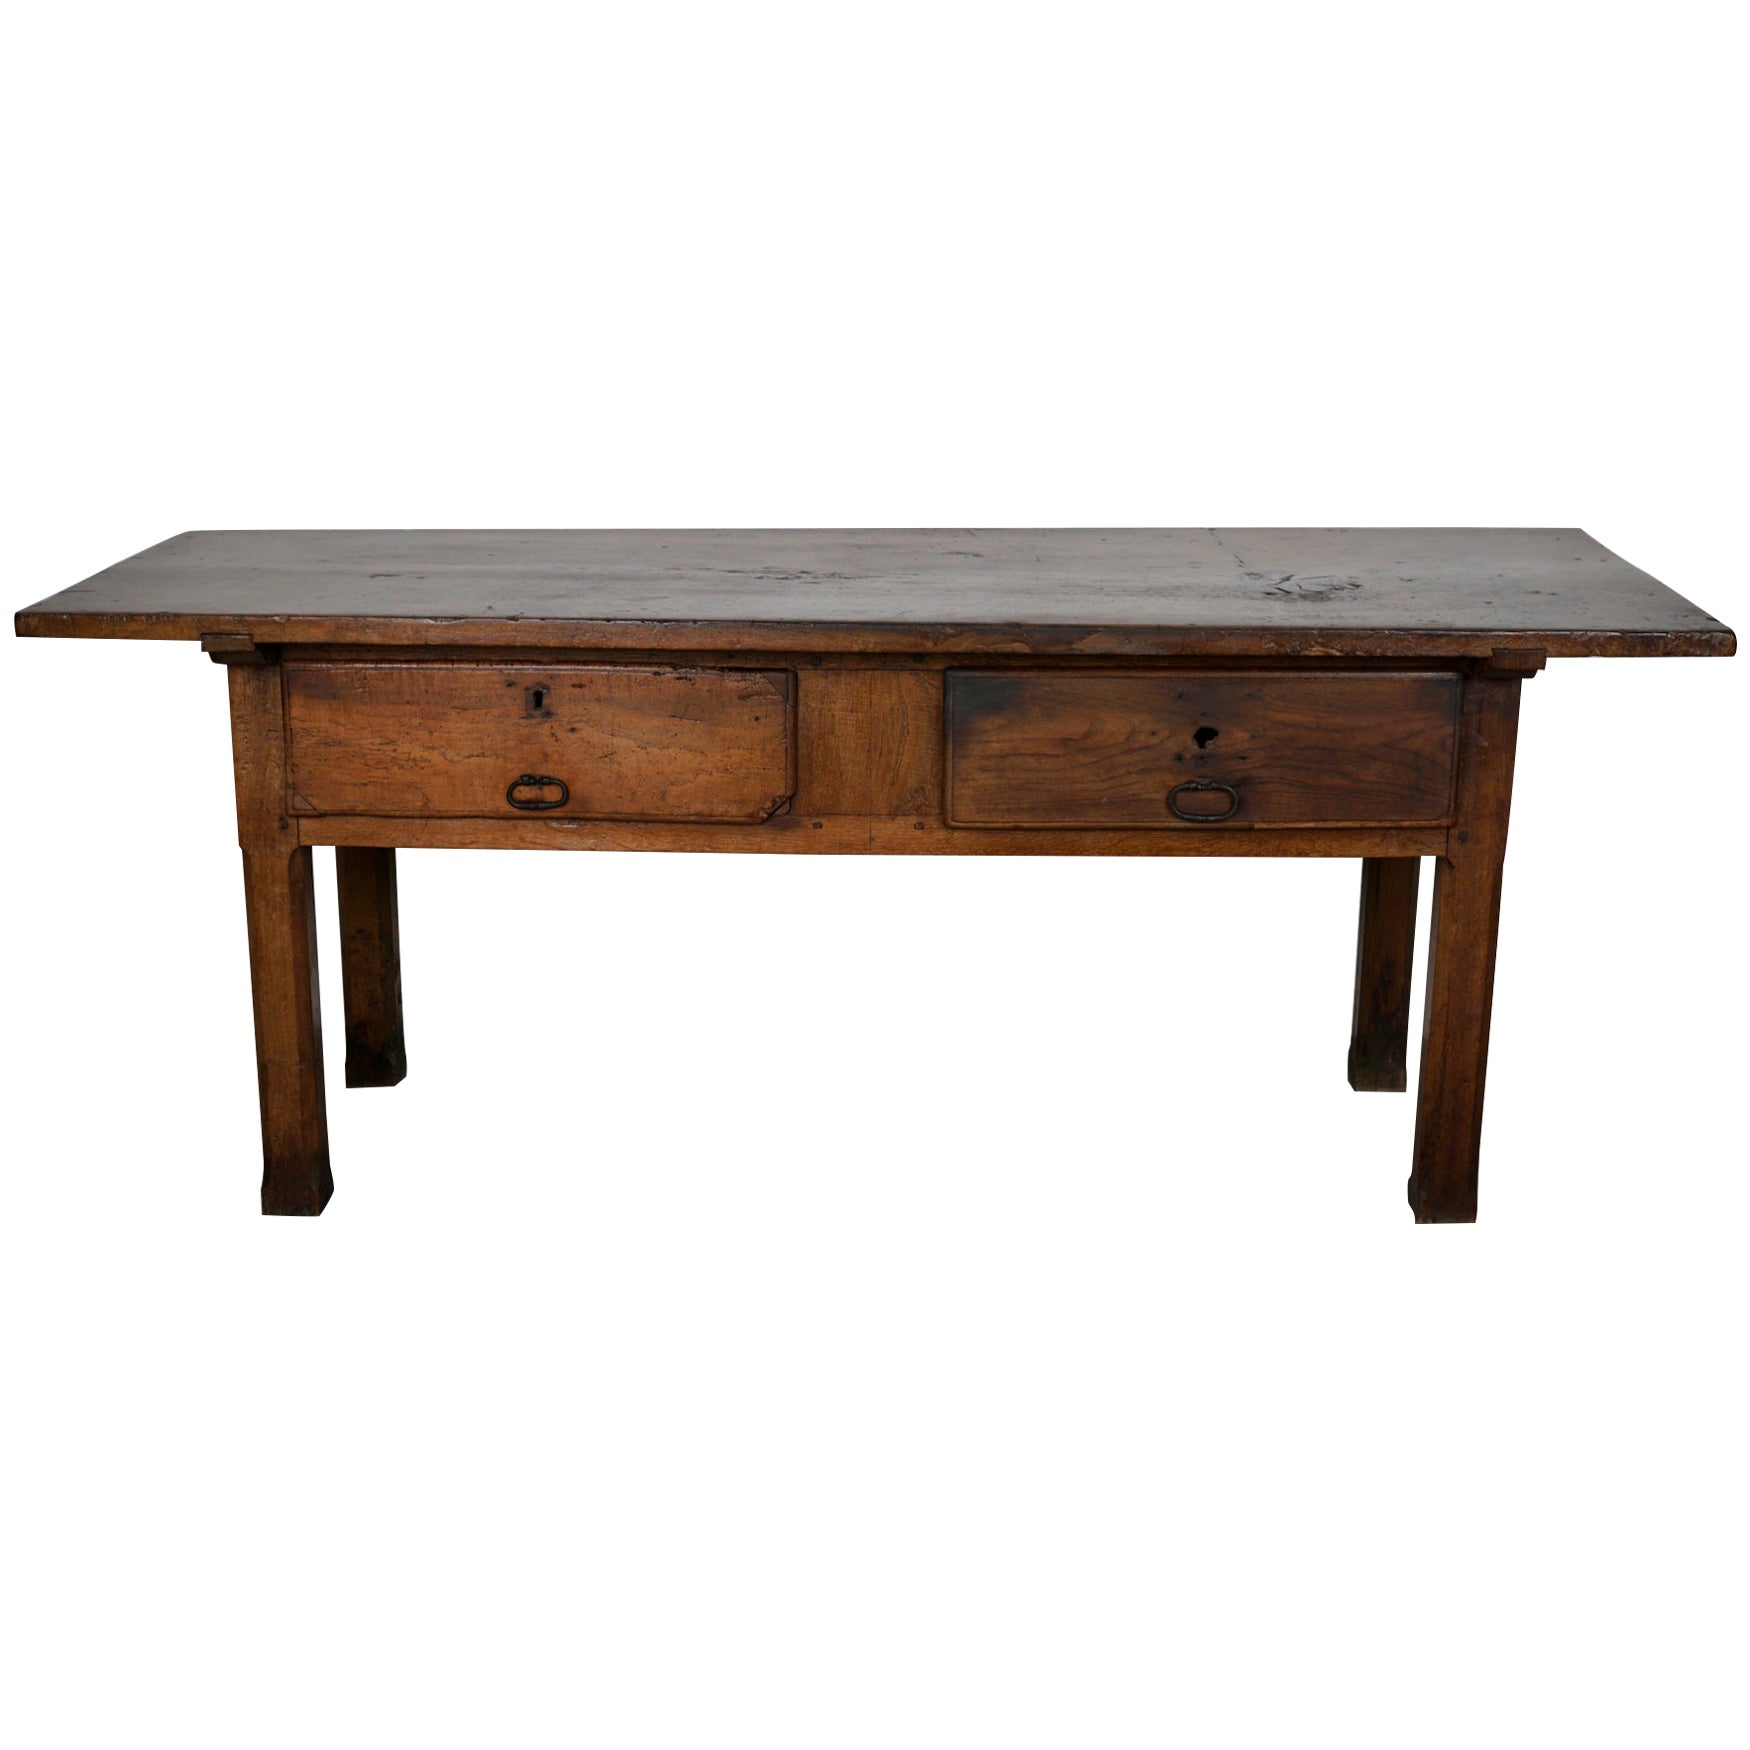 Antique Spanish Rustic Farmhouse Chestnut Side Table / Console, 18th Century For Sale